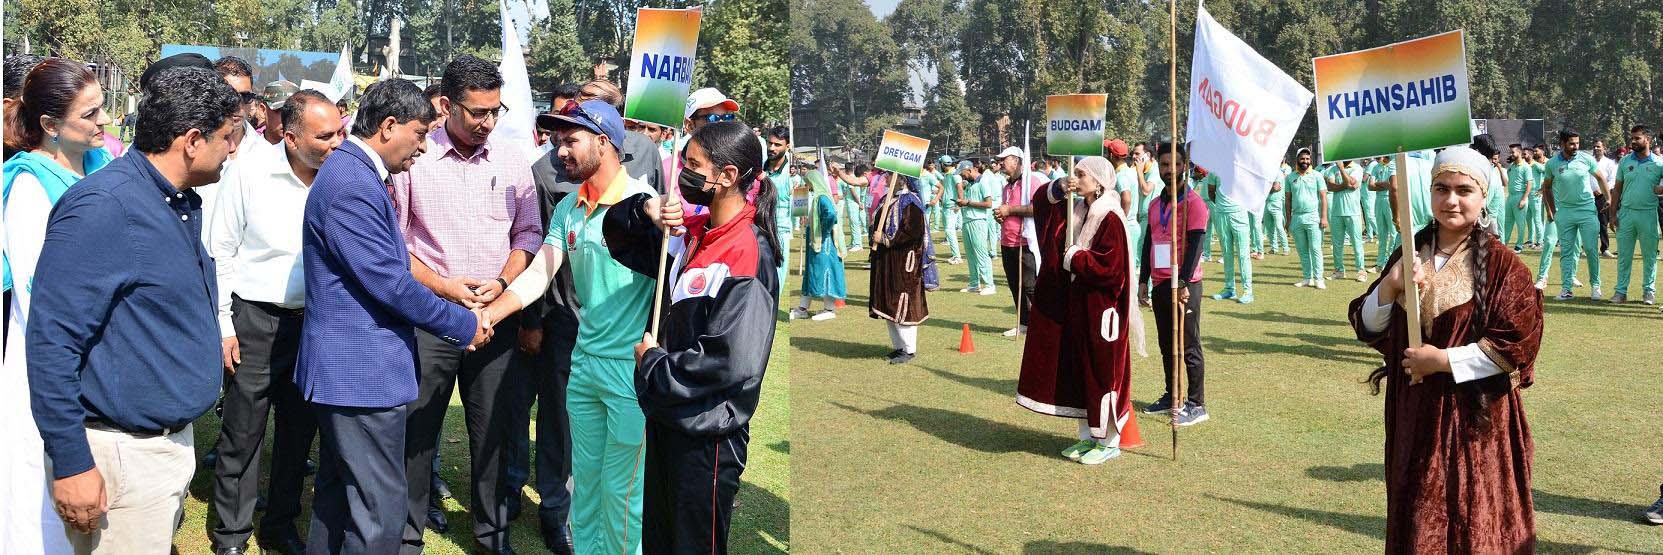 Chief Secretary Dr Arun K Mehta interacting with players(L) and participants during the inaugural ceremony(R) at Sher-e-Kashmir Stadium Srinagar on Thursday.